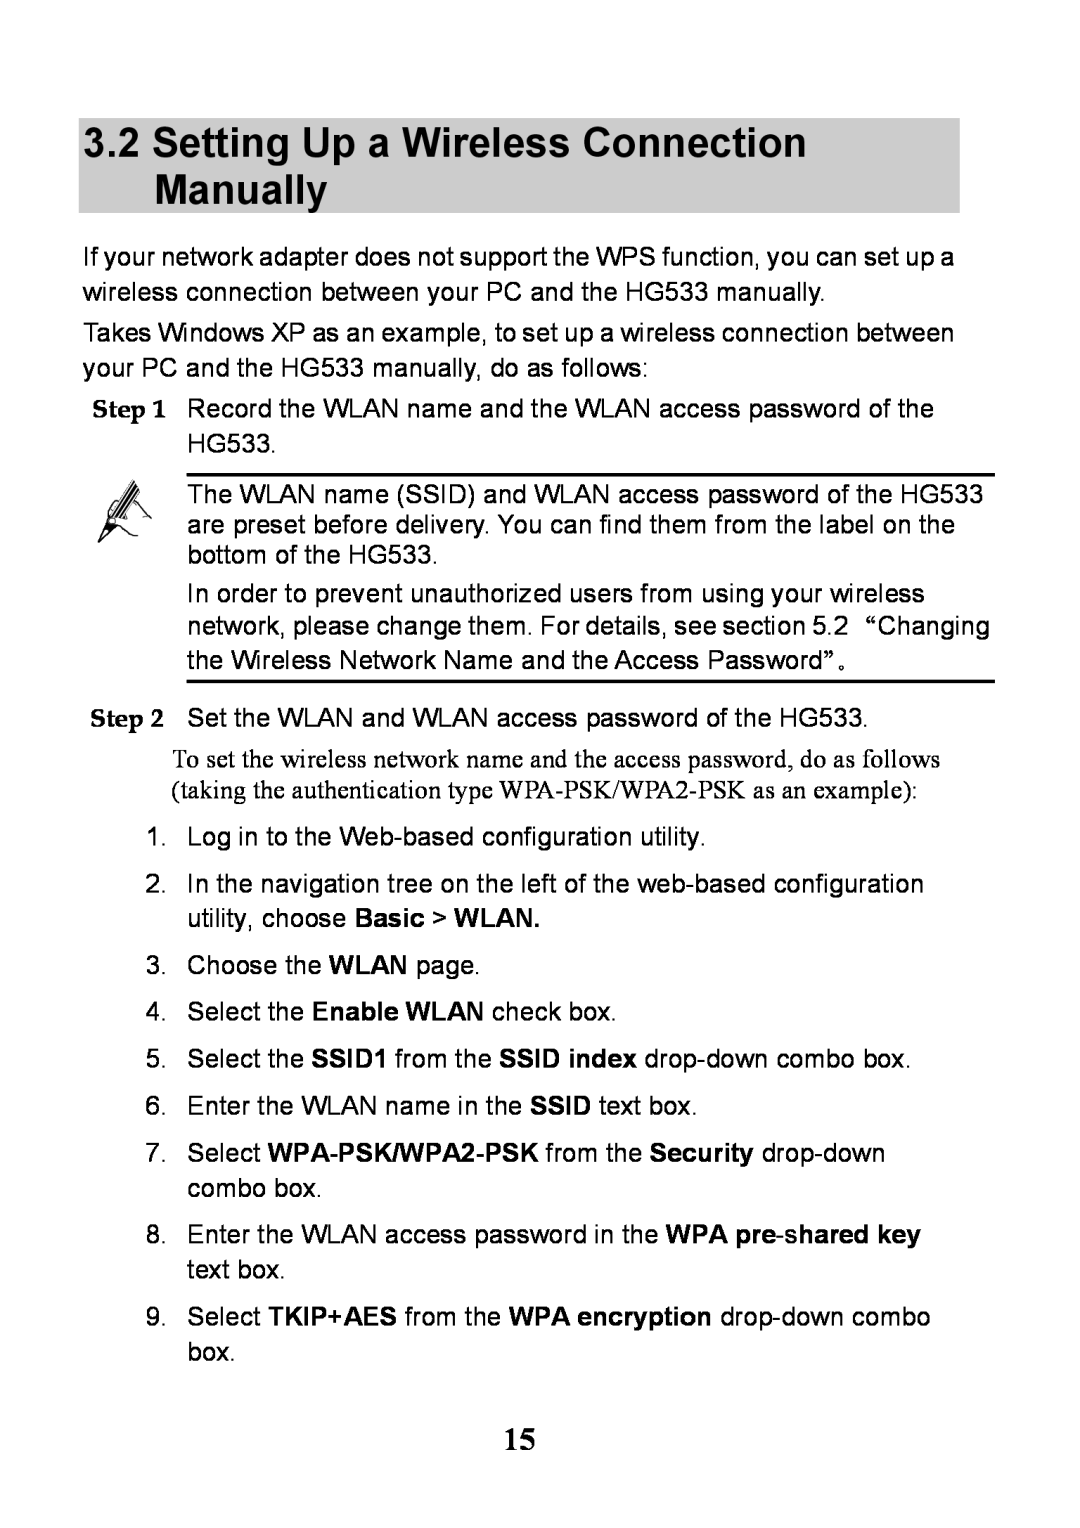 Huawei V100R001 Setting Up a Wireless Connection Manually, Select WPA-PSK/WPA2-PSK from the Security drop-down combo box 